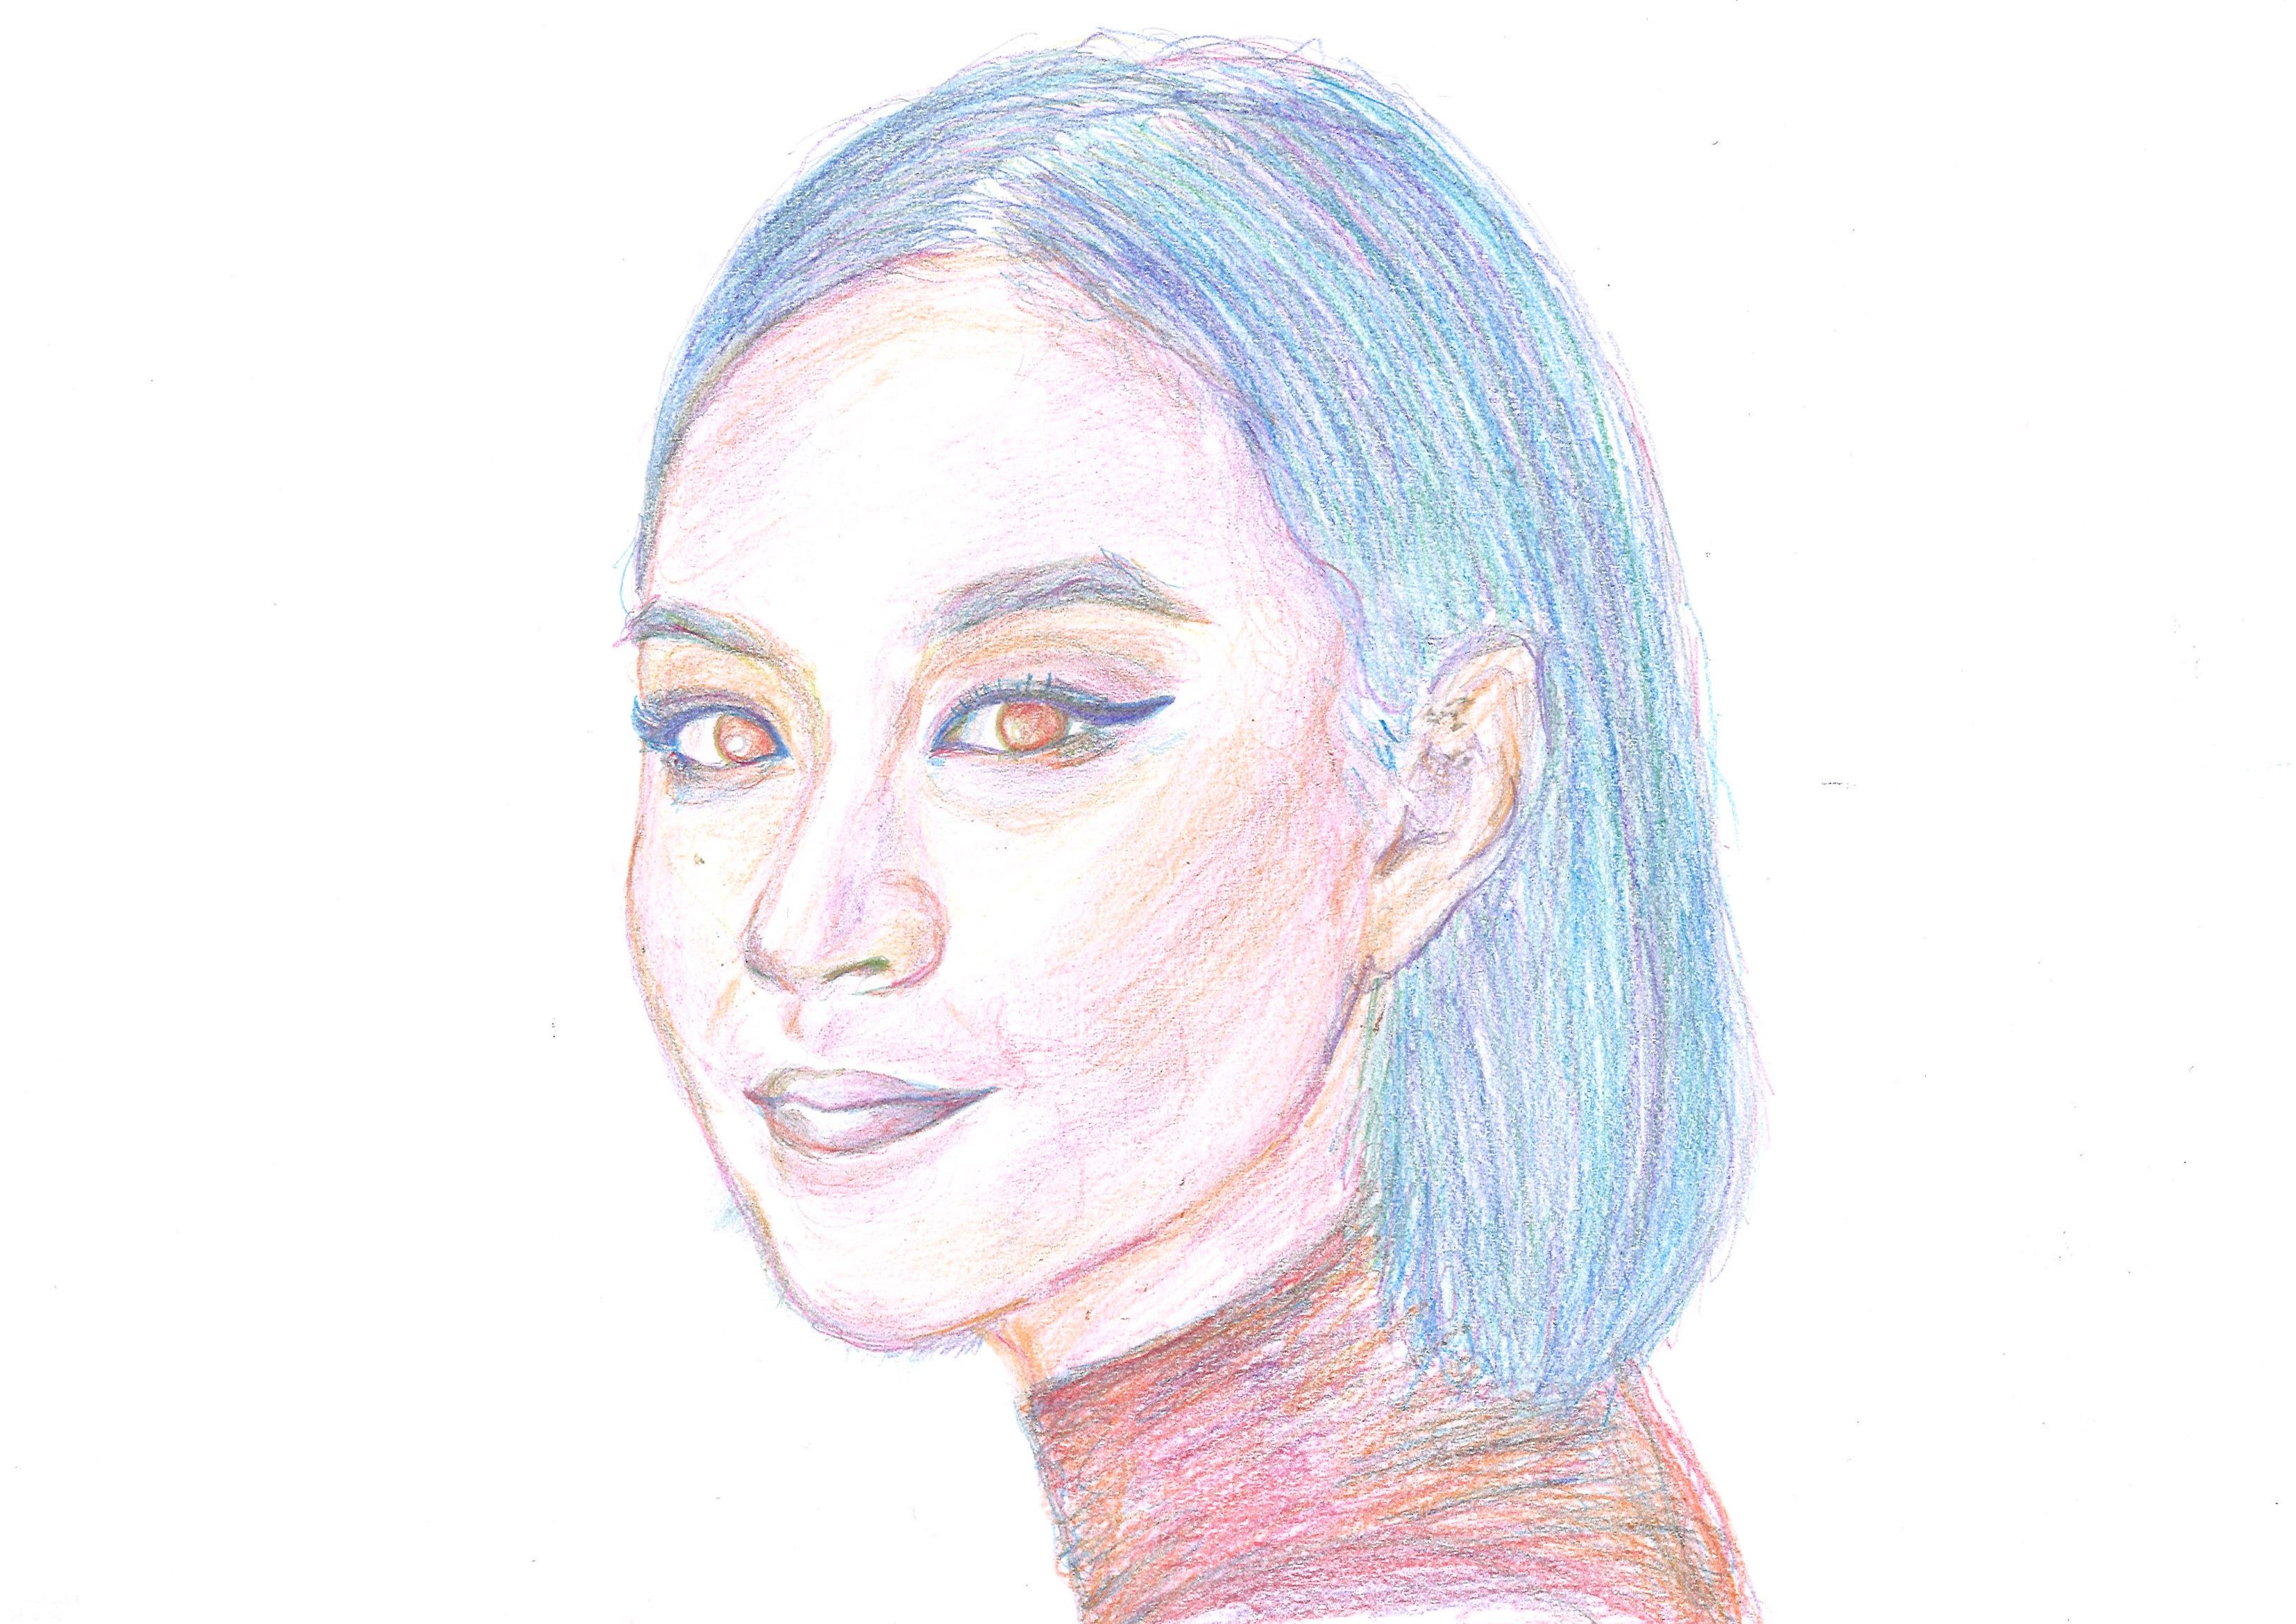 Colouring pencil portrait of Chloe gong